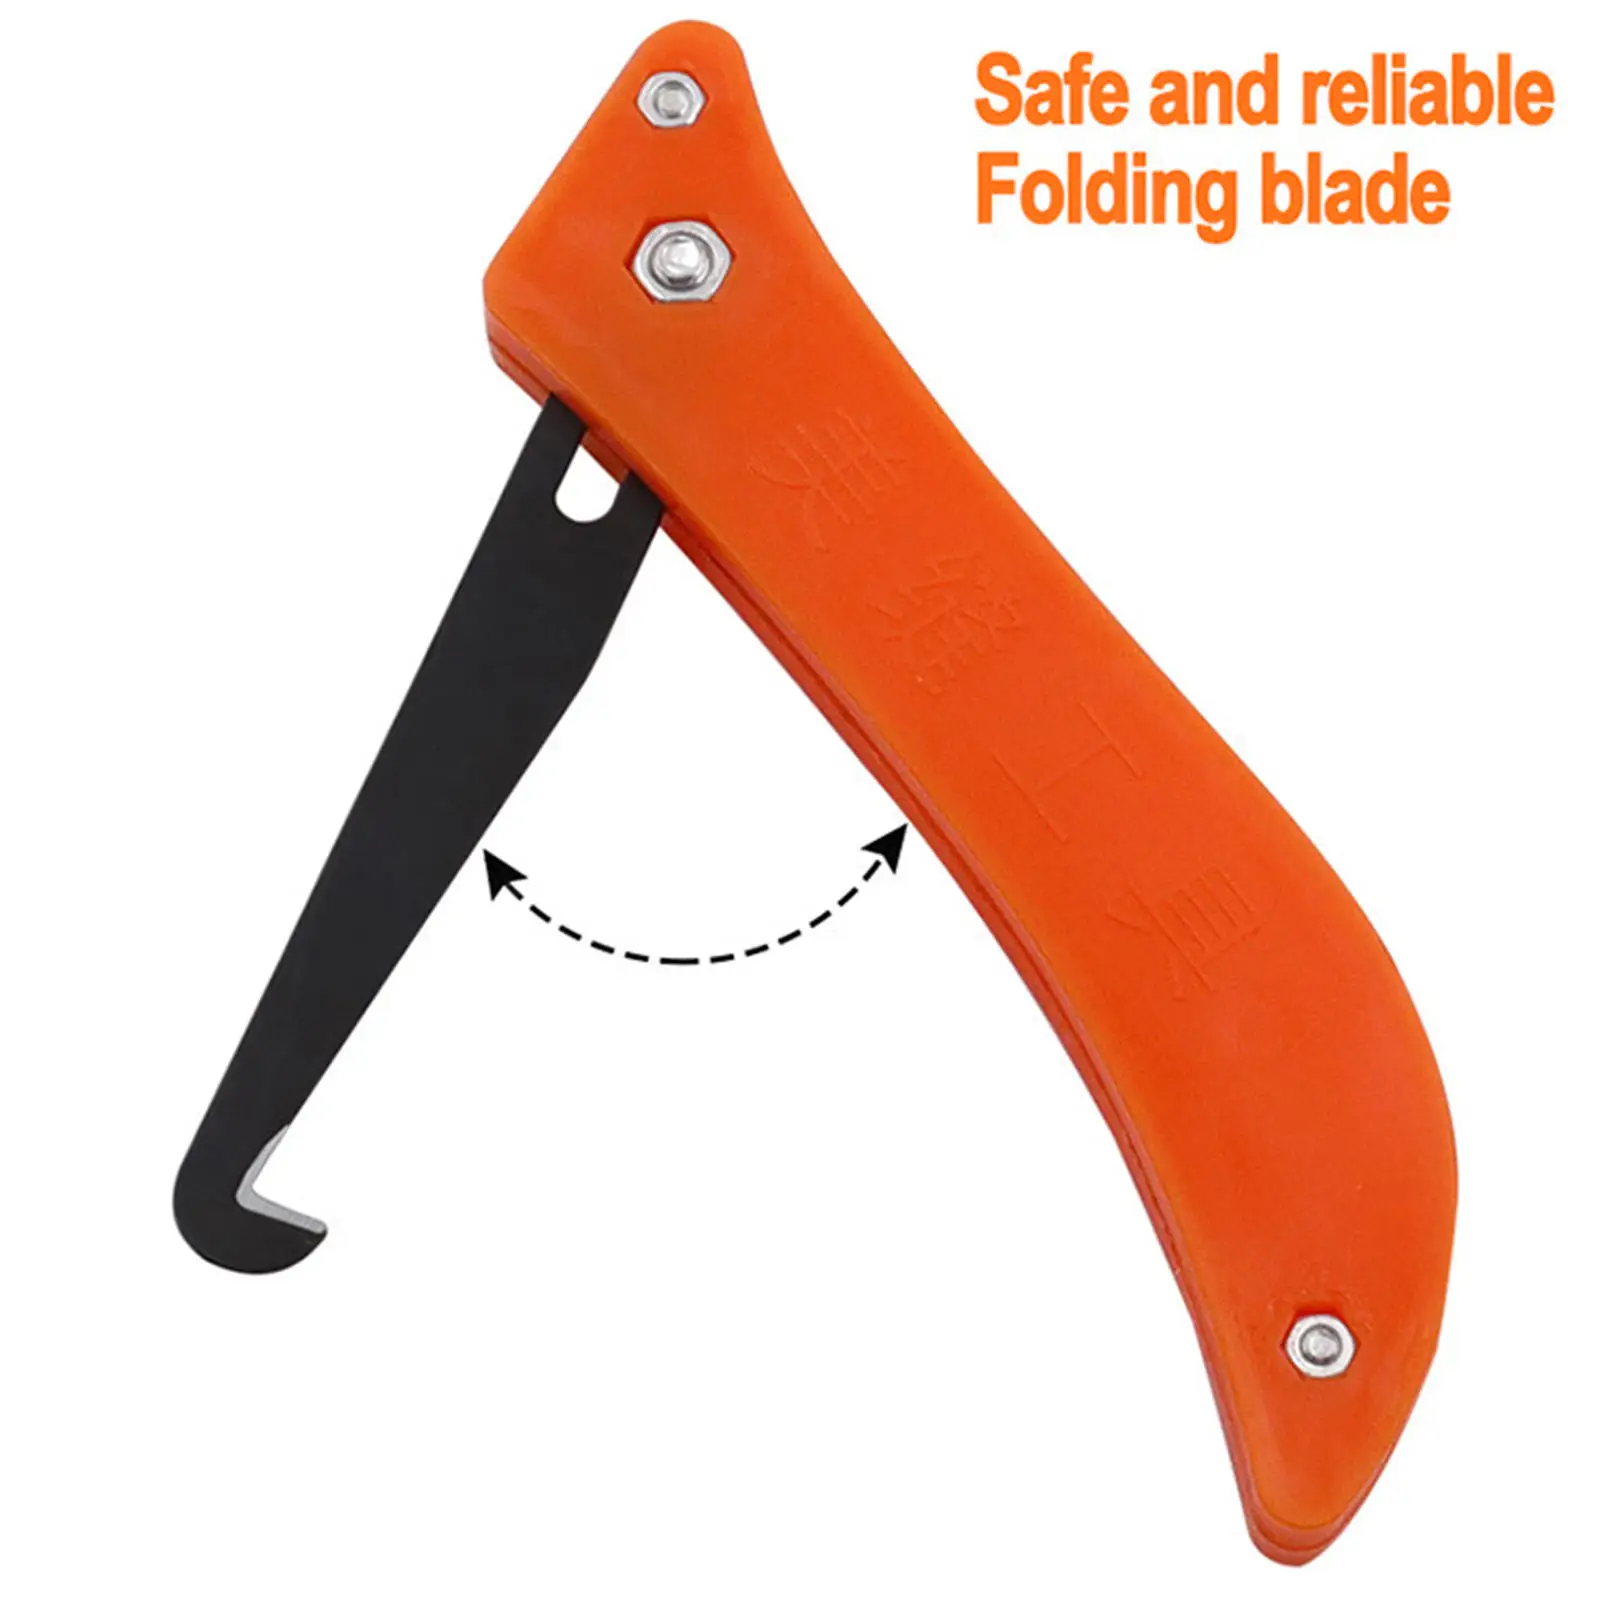 Professional Grout Remover Tool Tile Gap Repair Tool Tile Joint Remover